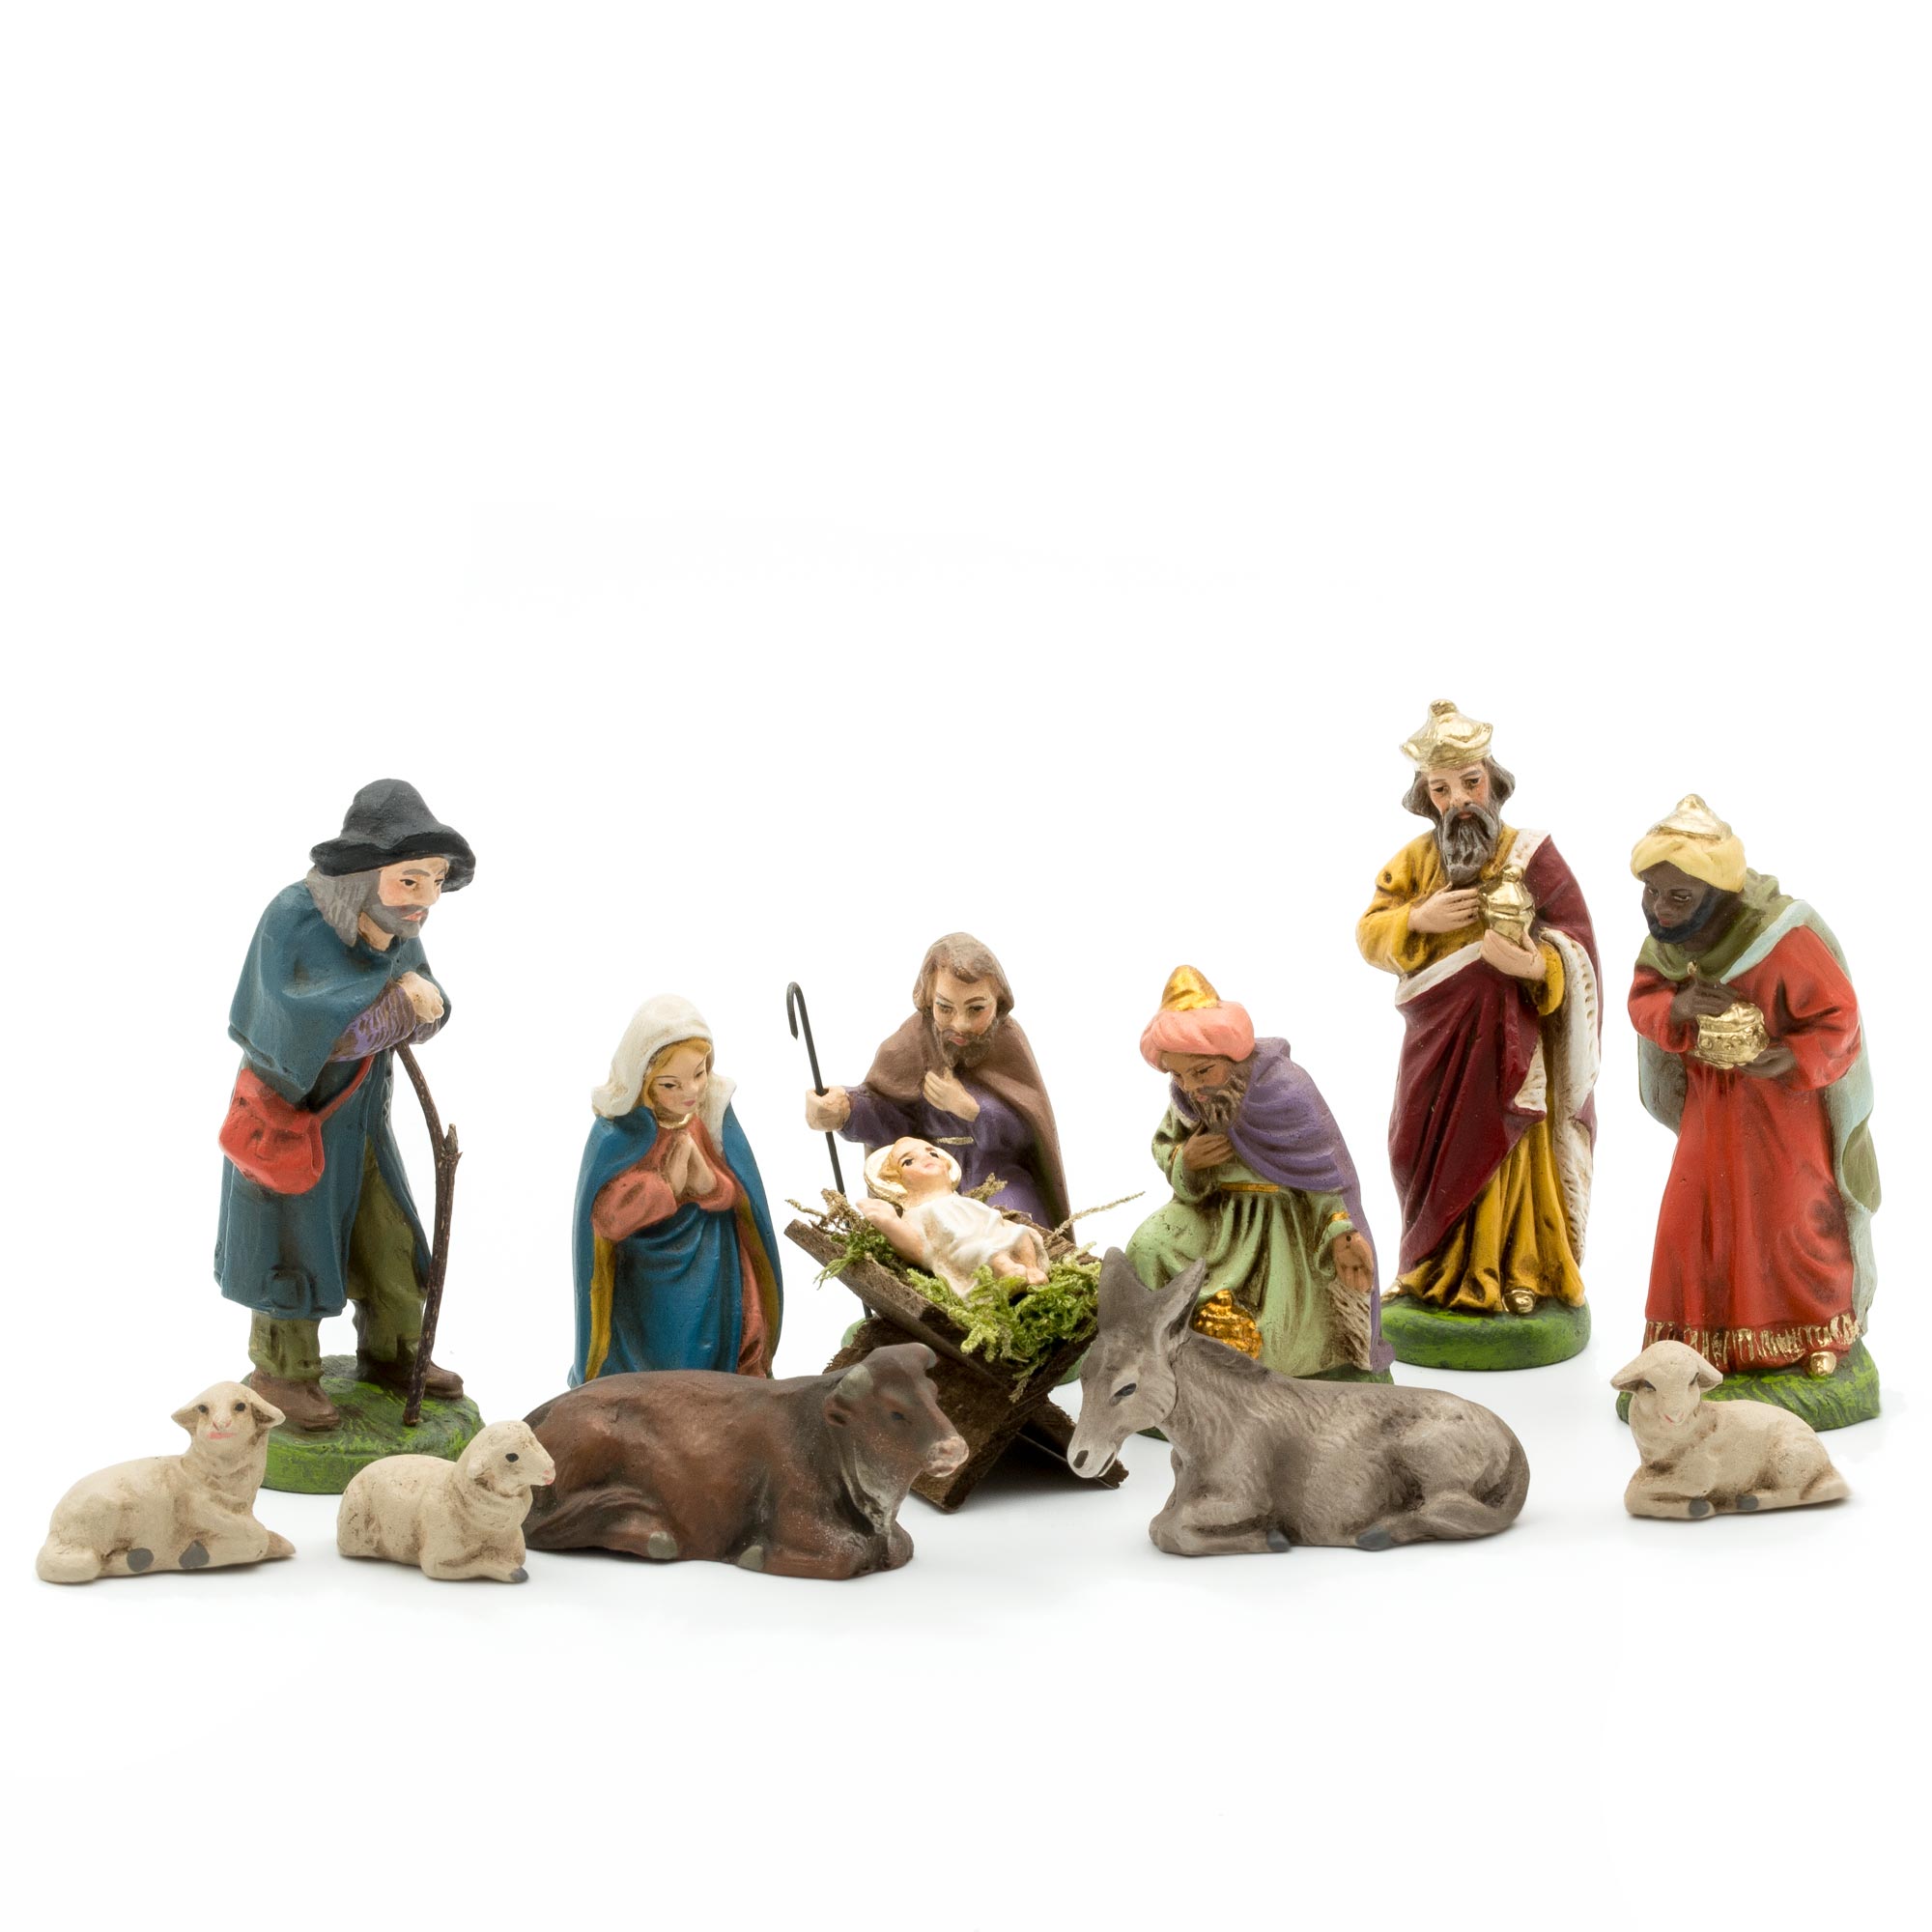 Nativity set, 12 pcs., to 2.5 in. figures with infant Jesus lying in wooden crib